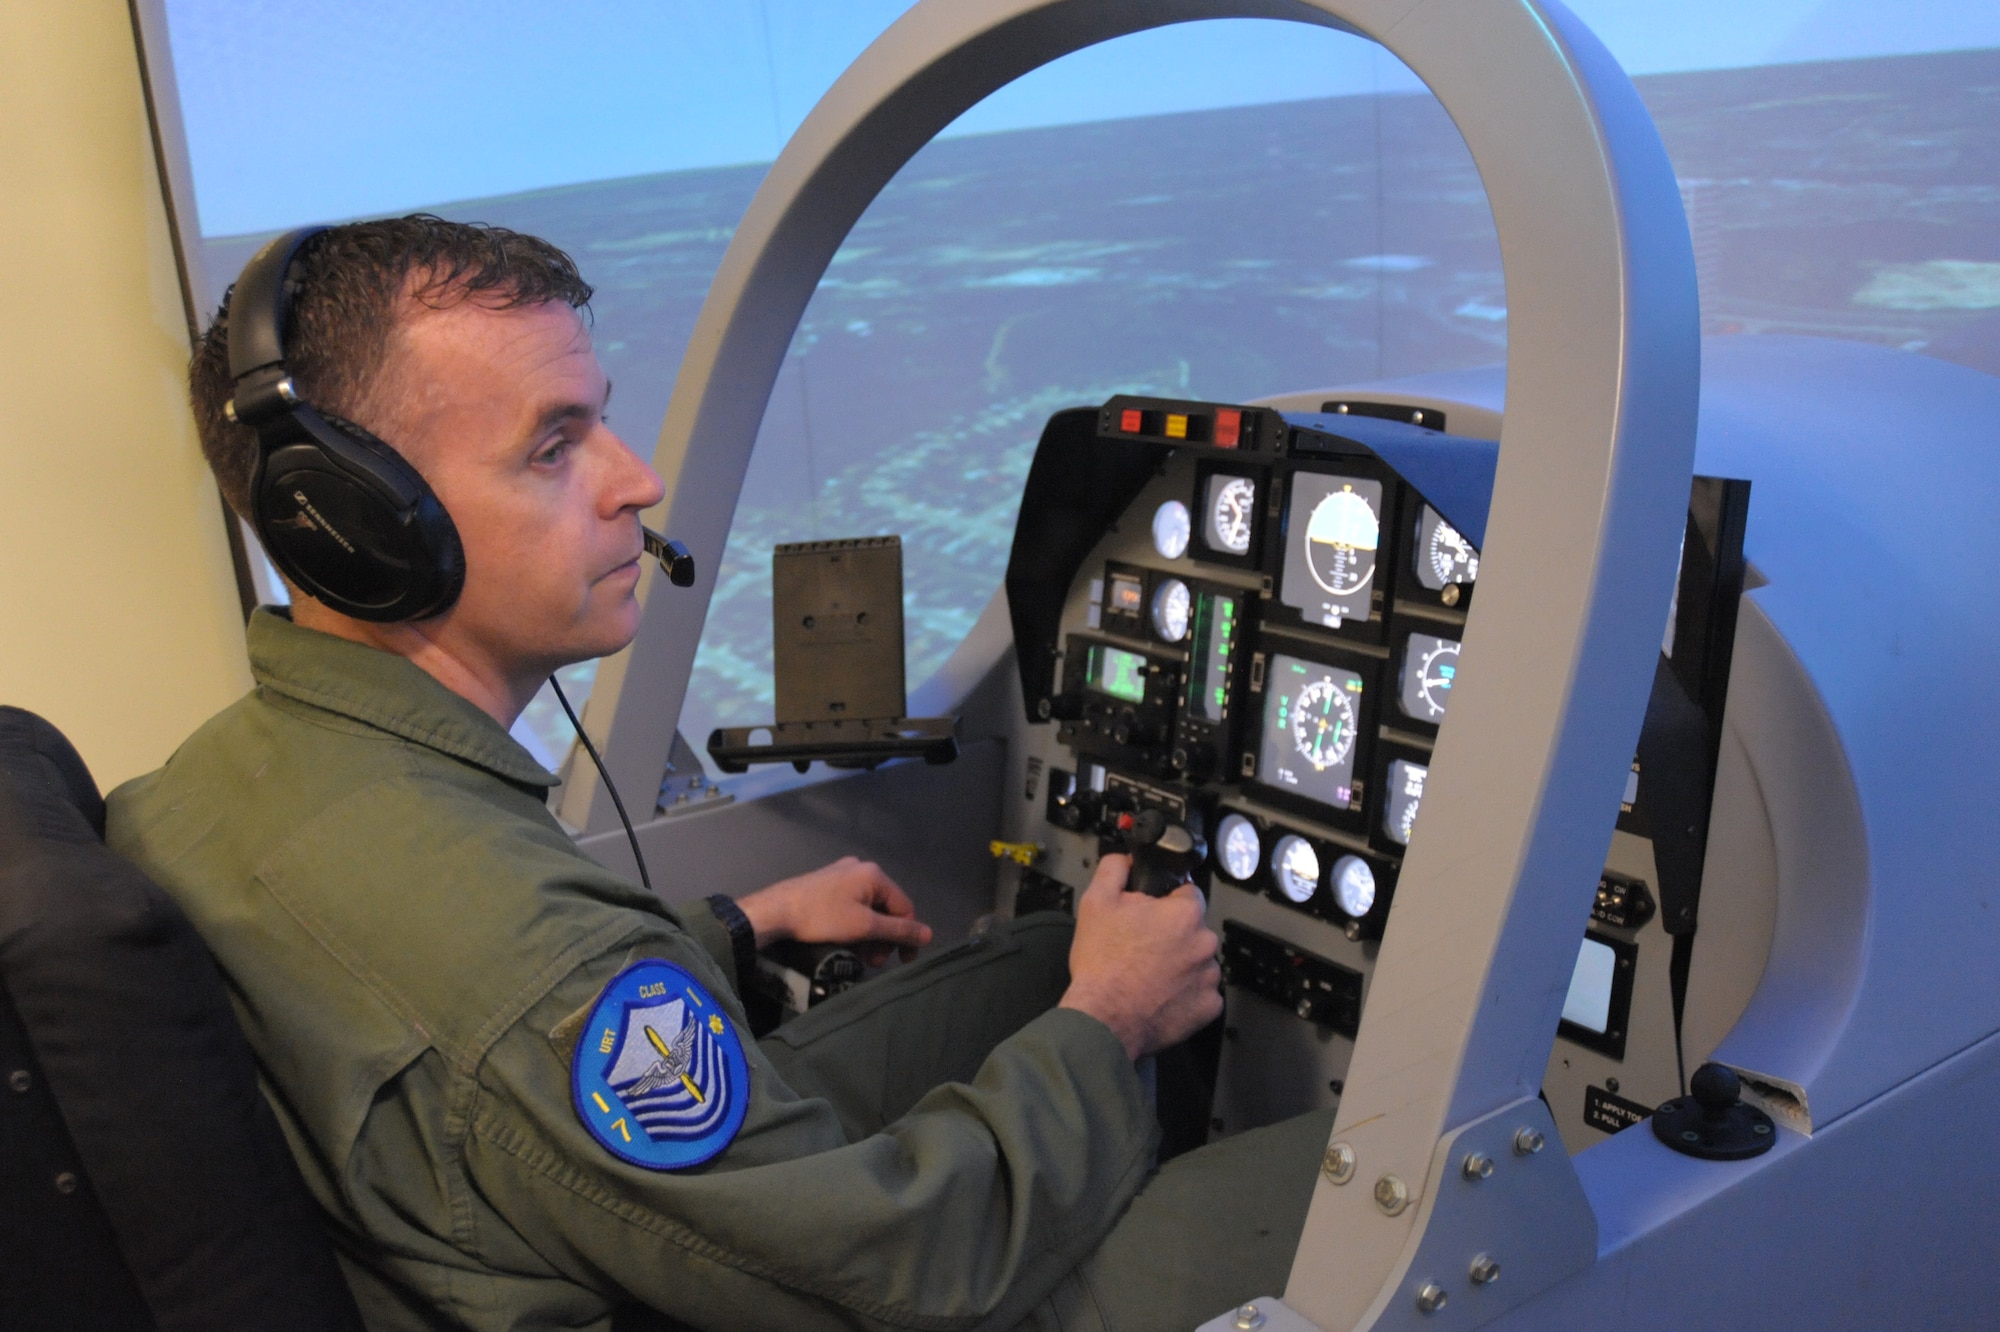 U.S. Air Force Master Sgt. Mike, one of the first Enlisted Pilot Initial Class students, operates flight controls of a T-6 Texan II simulator during the 558th Flying Training Squadron’s Remotely Piloted Aircraft Fundamentals Course at Joint Base San Antonio-Randolph, Texas, May 4, 2017. Mike is one of the first three enlisted Airmen to graduate from the course, making him one of the service's first enlisted pilots since 1961. (U.S. Air Force photo by Joel Martinez) 